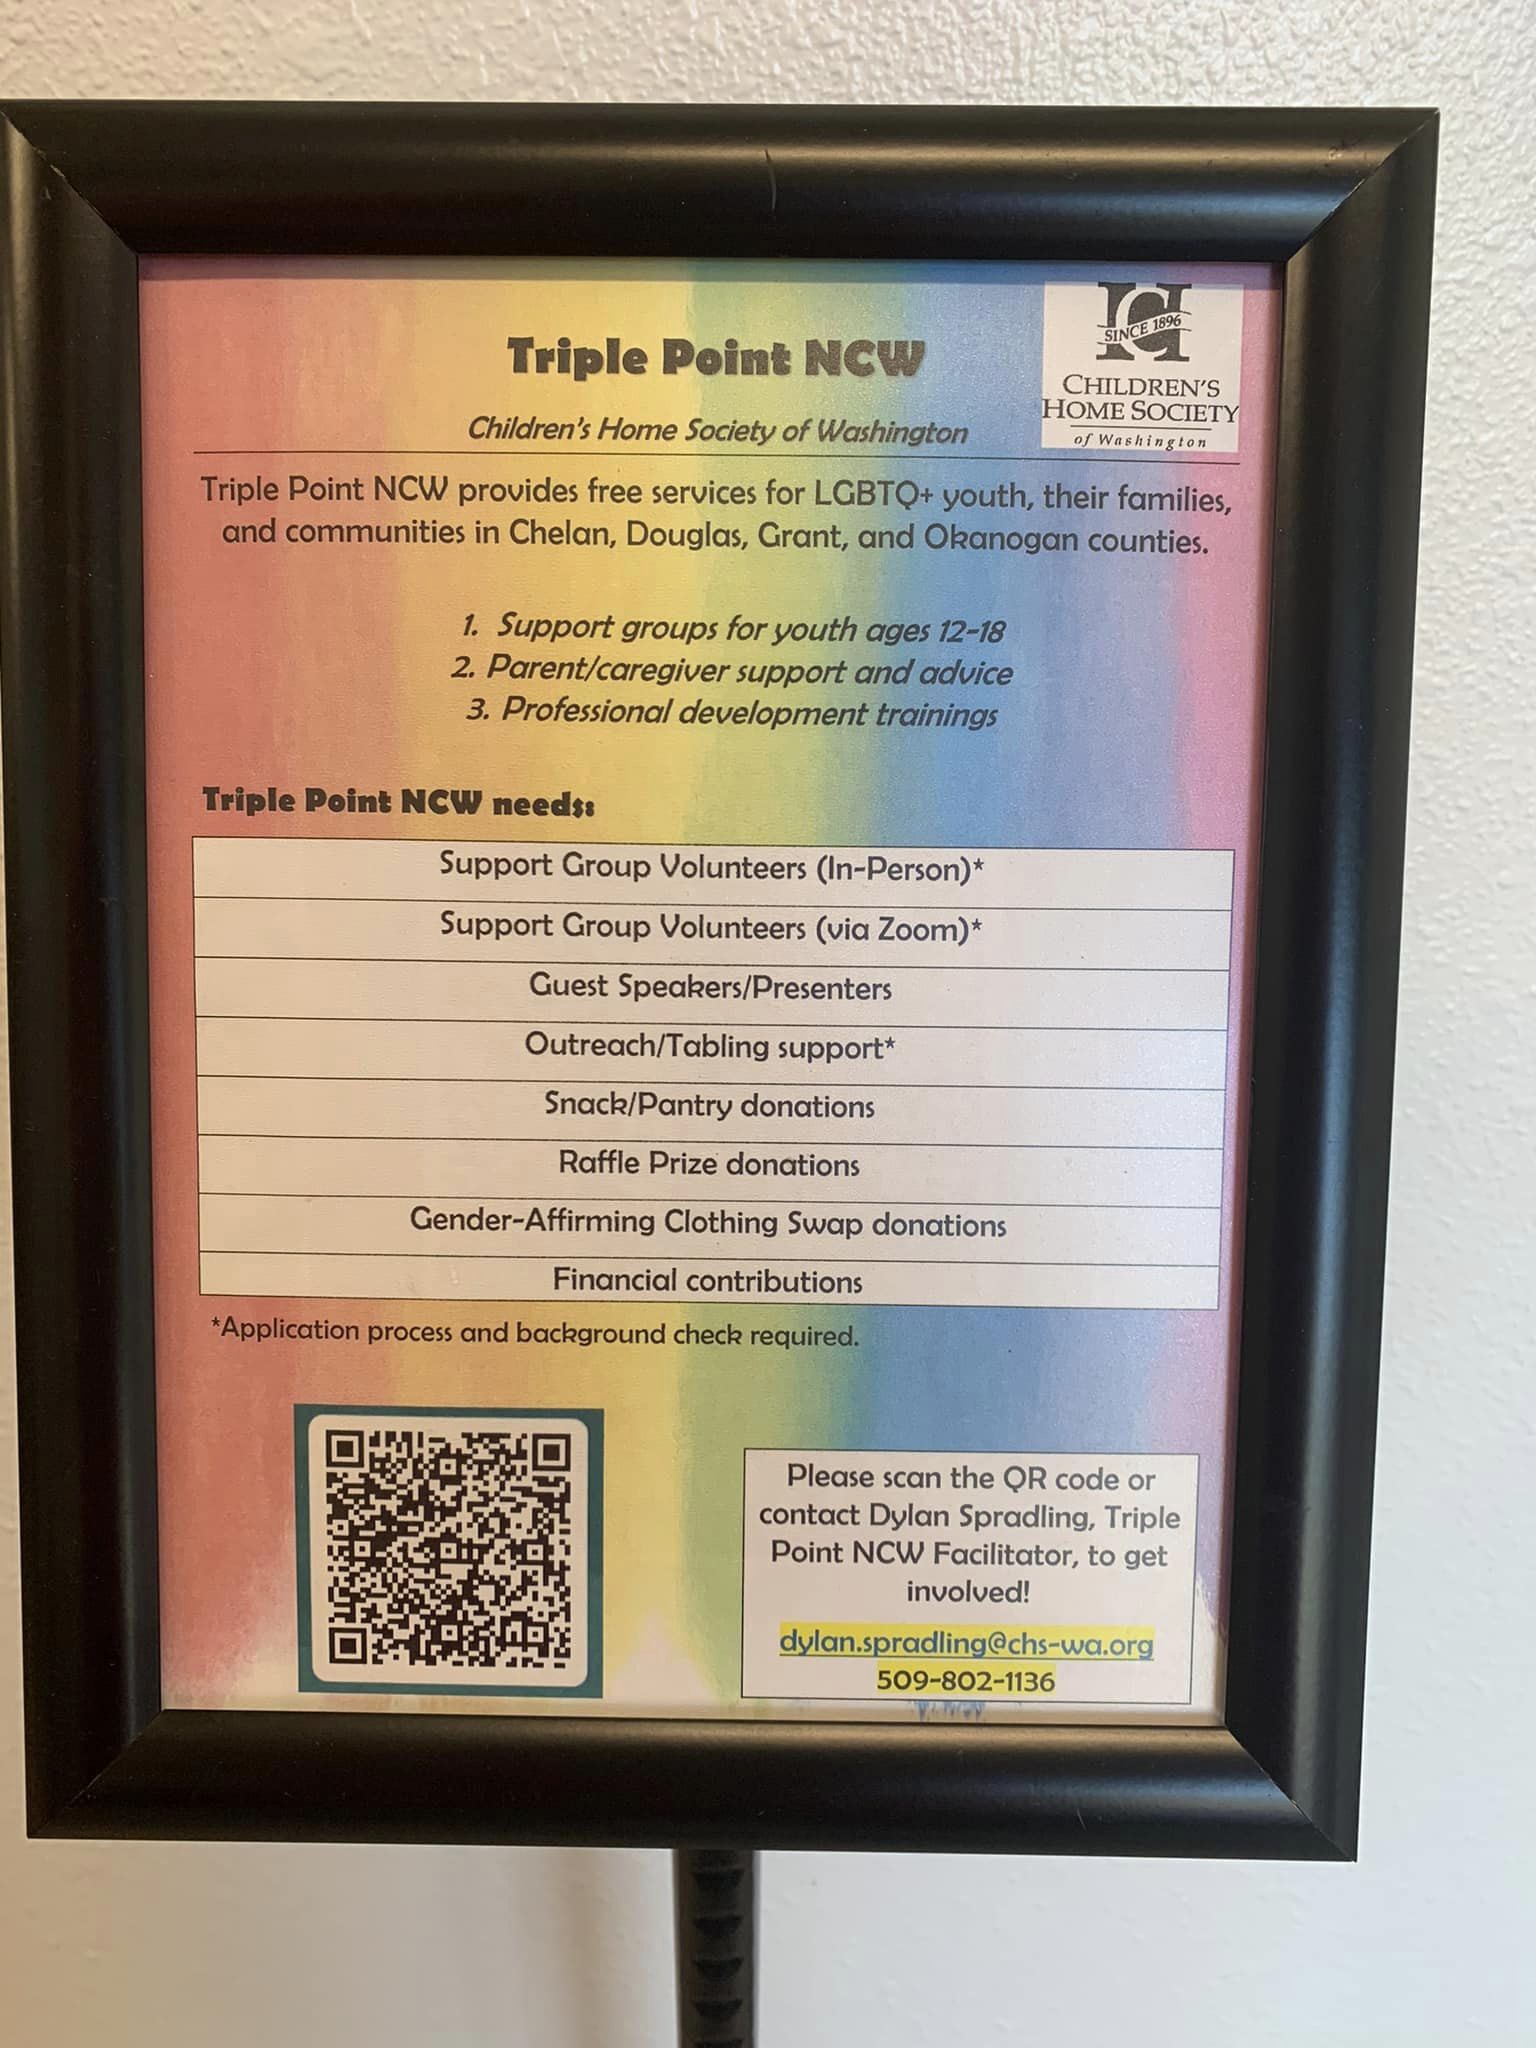 Free Services for LGBTQ+ Youth